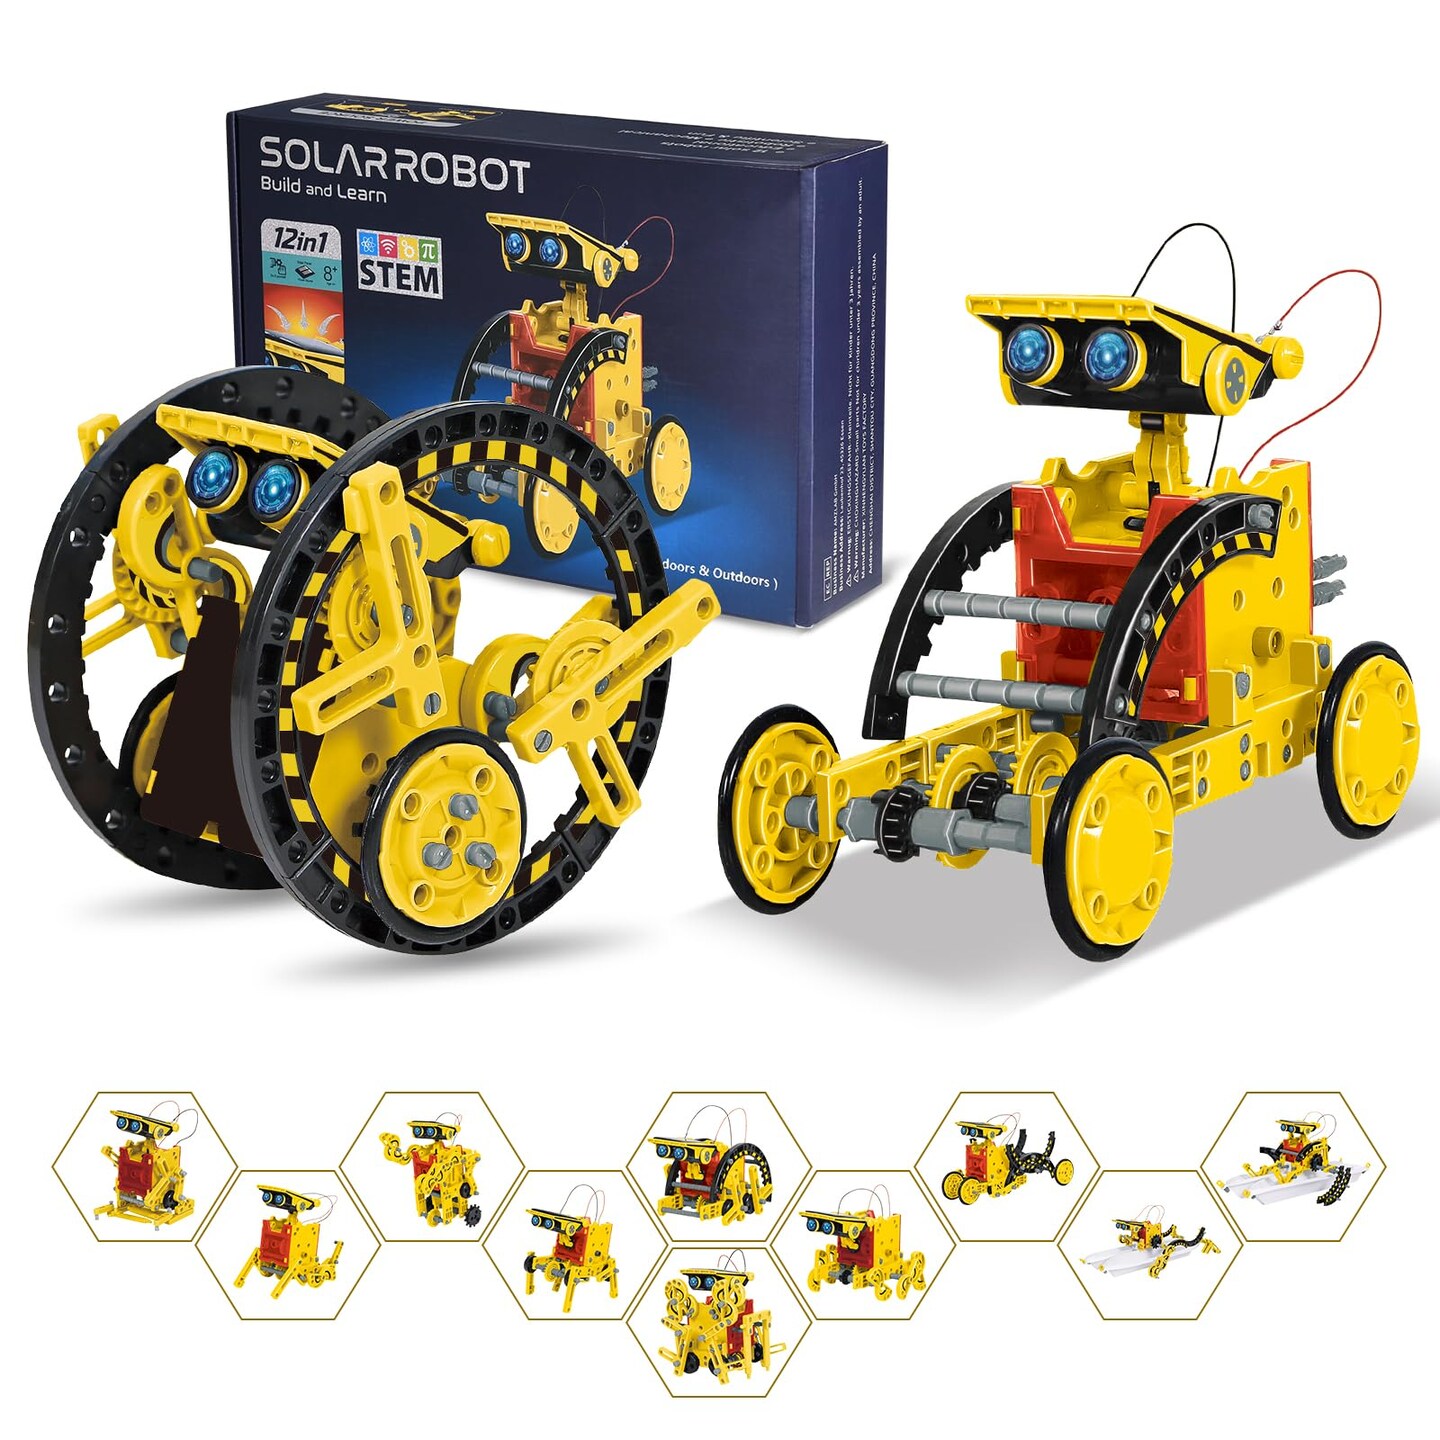 Top Tech (STEM) Gifts for Kids Aged 8, 9 and 10 - Coding, Robots, Gadgets,  Maker | Tech Age Kids | Technology for Children